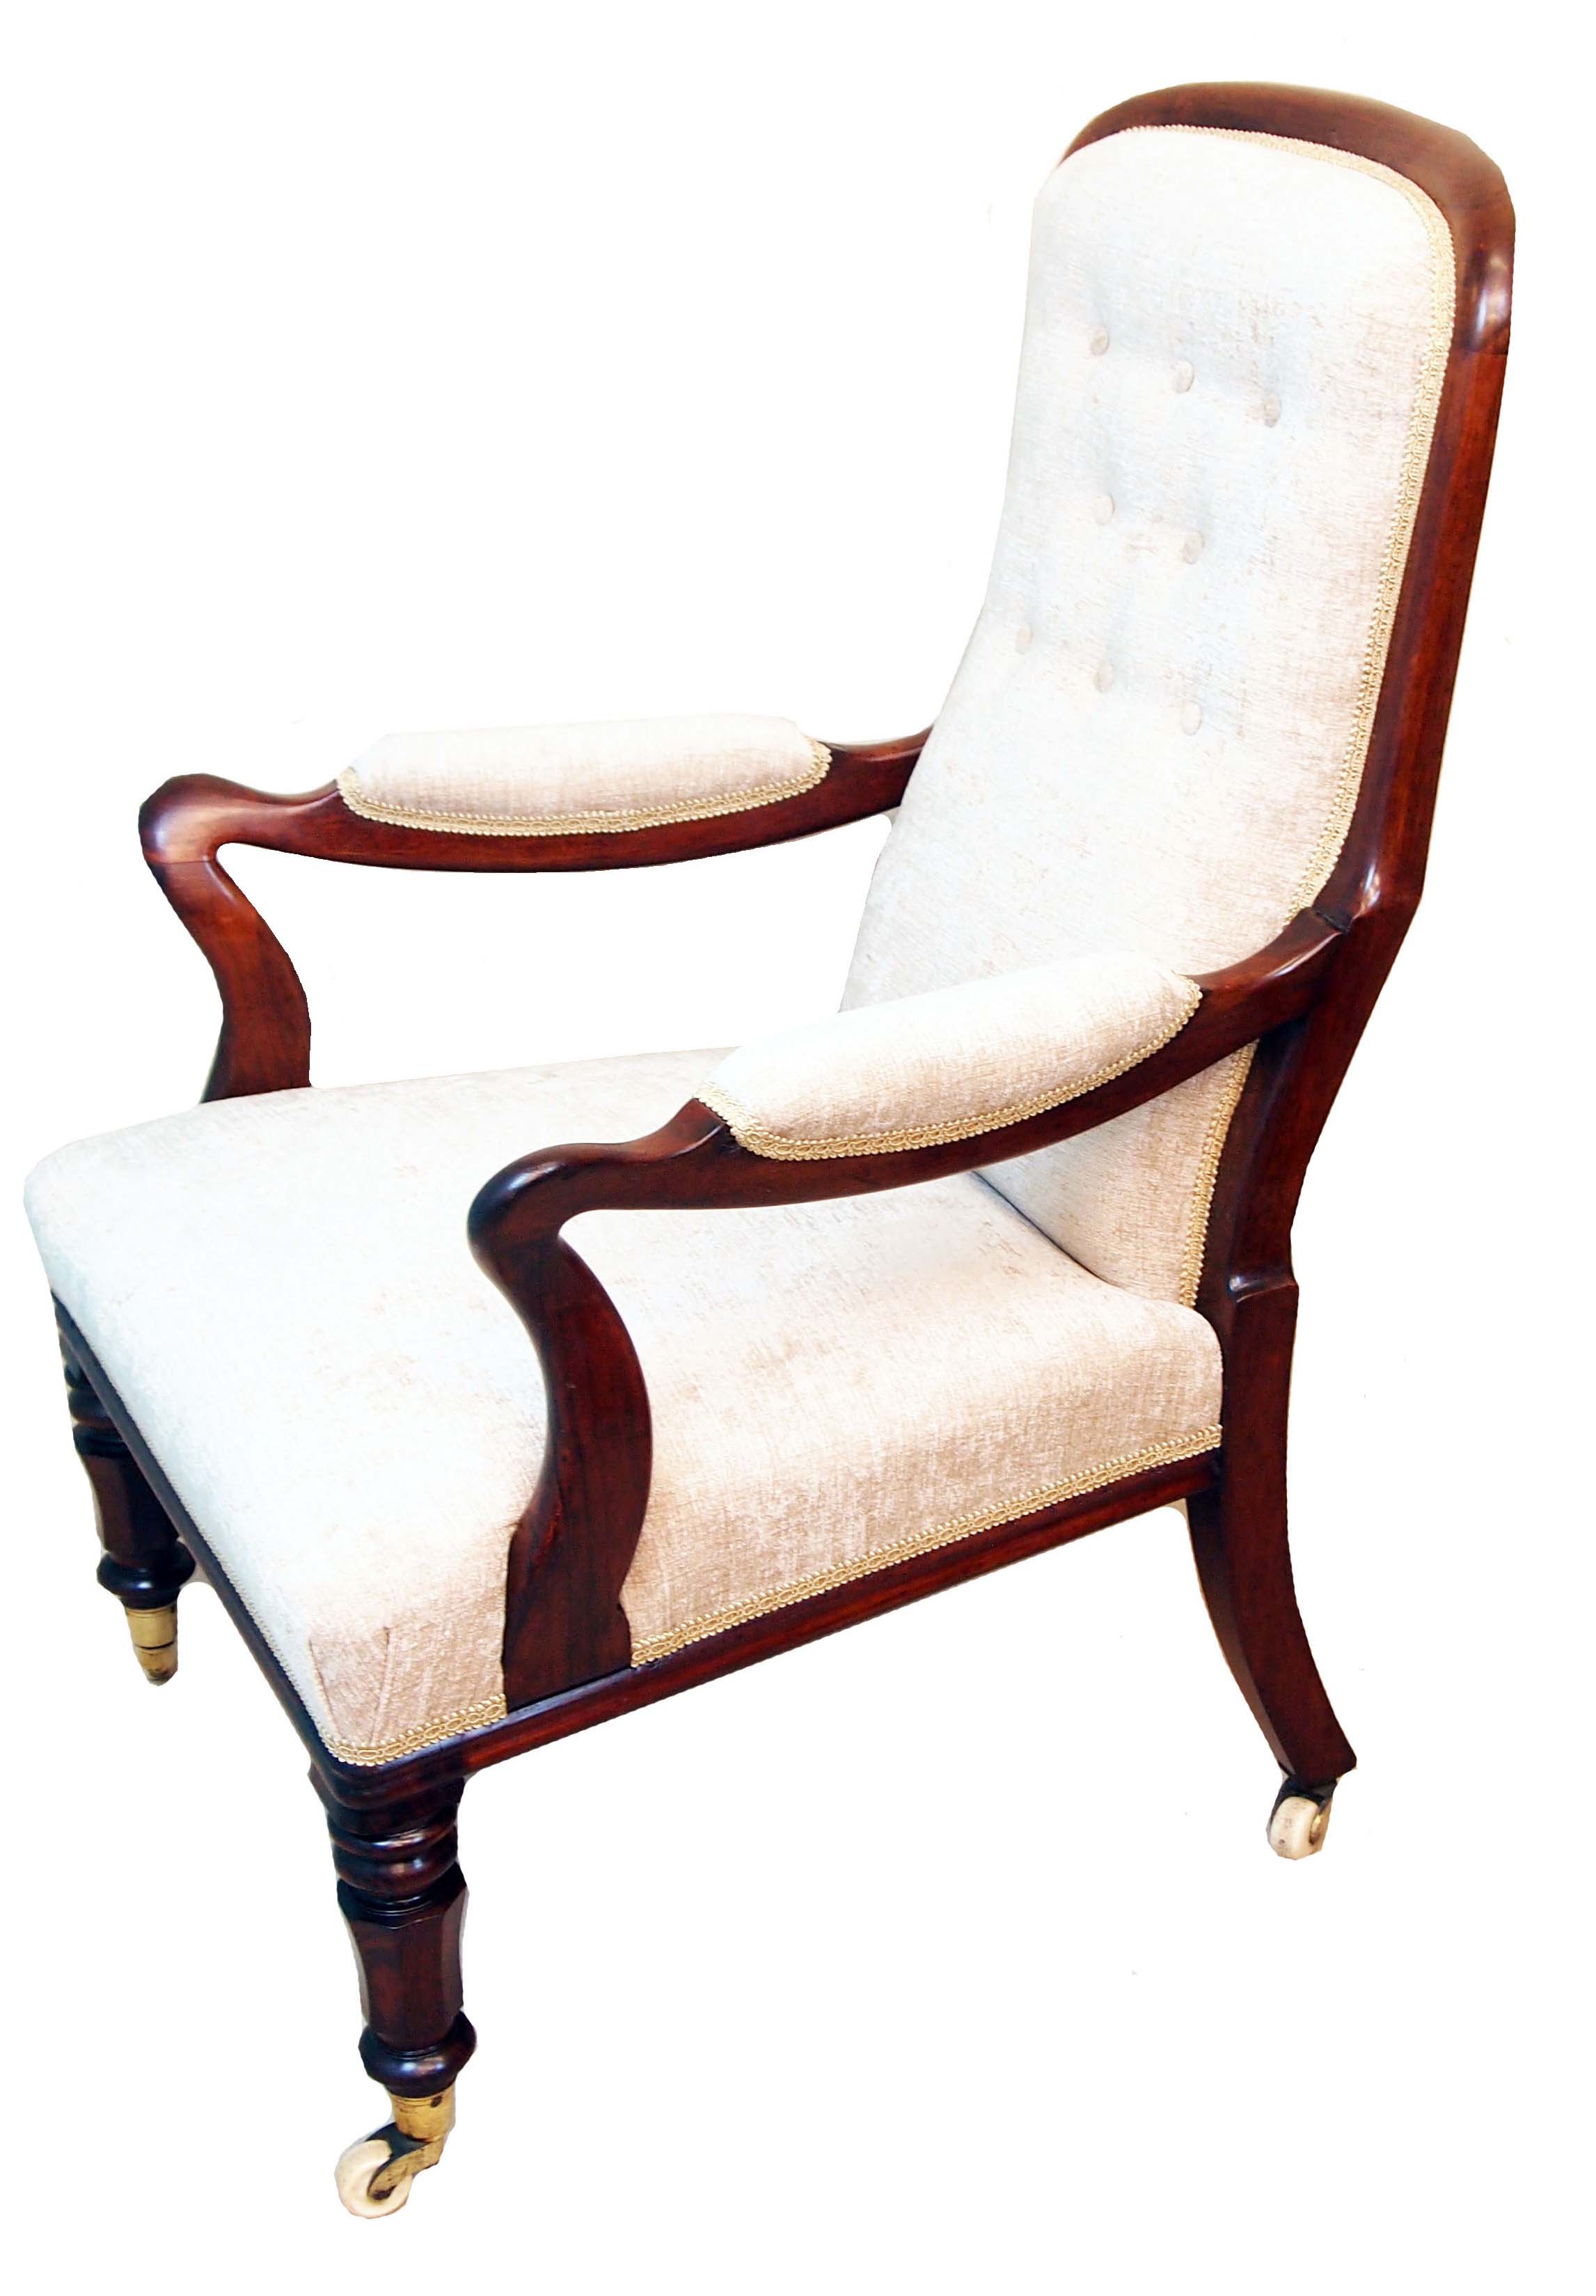 Pair of exceptional quality 19th century rosewood library armchairs - Image 2 of 3